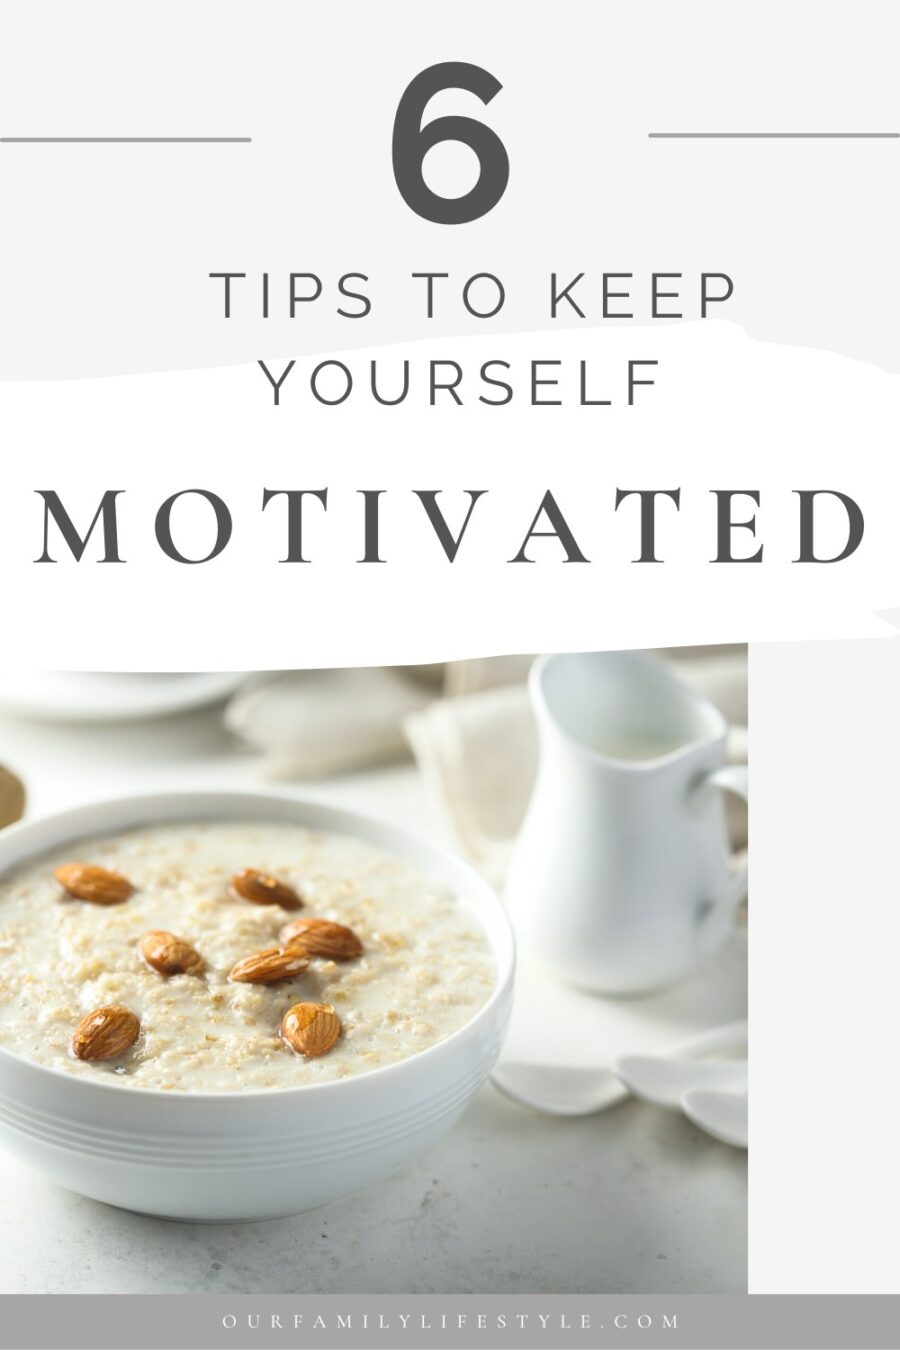 6 Tips to Keep Yourself Motivated through Your Daily Routines